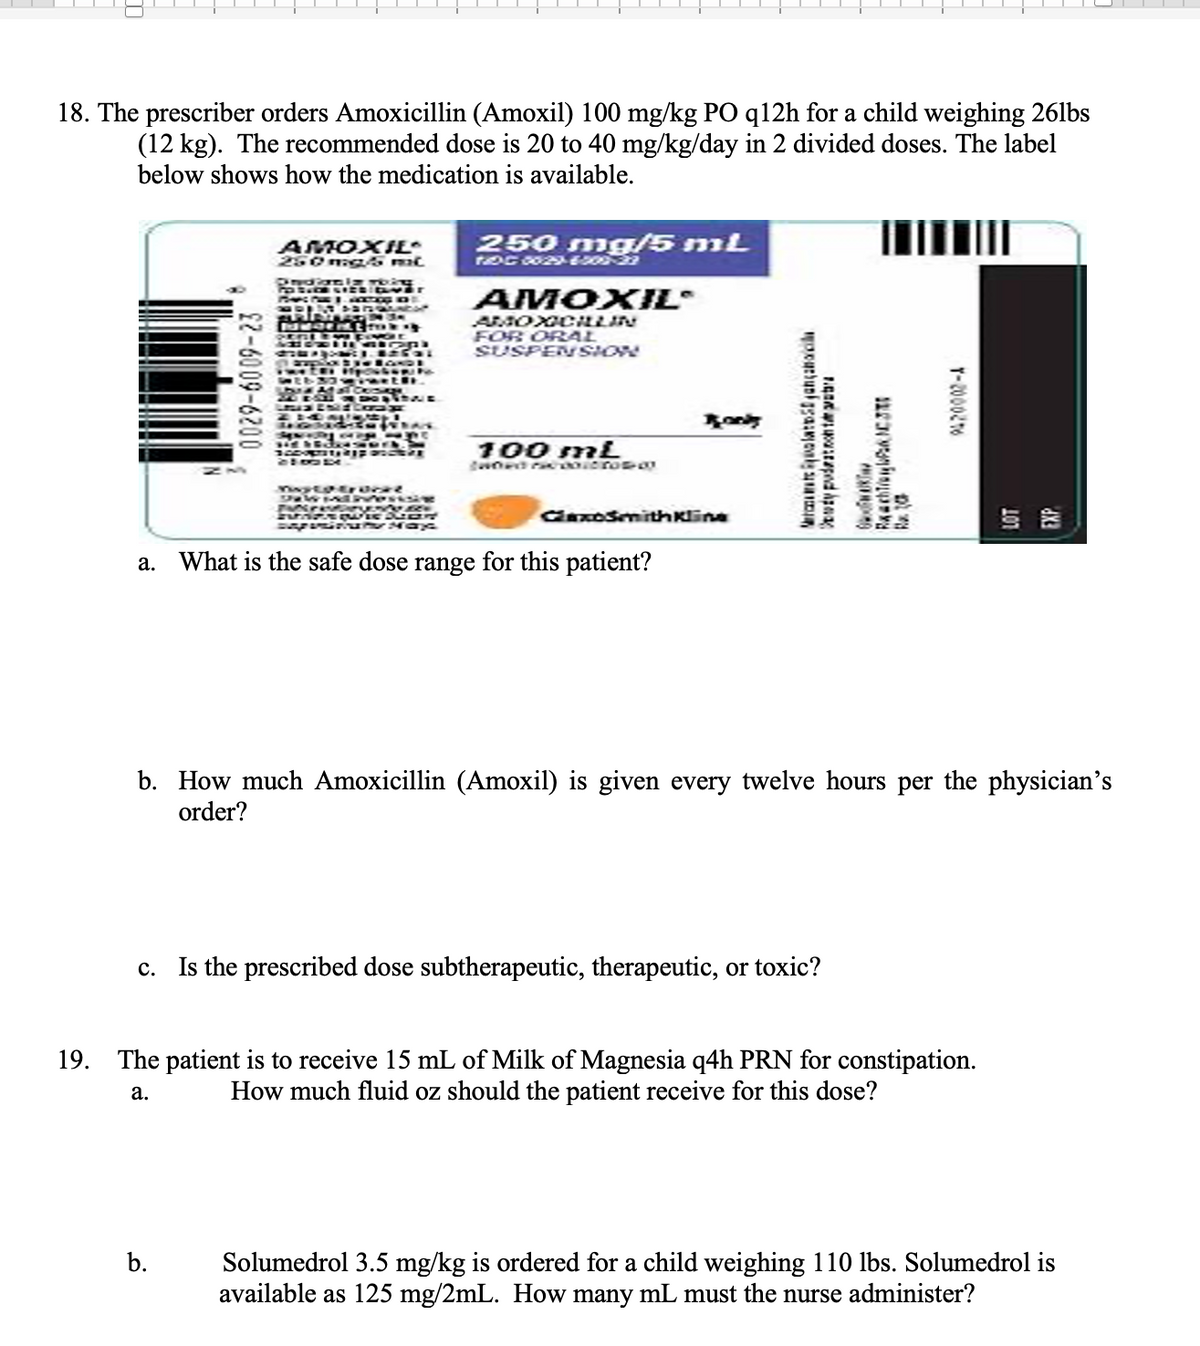 18. The prescriber orders Amoxicillin (Amoxil) 100 mg/kg PO q12h for a child weighing 26lbs
(12 kg). The recommended dose is 20 to 40 mg/kg/day in 2 divided doses. The label
below shows how the medication is available.
22-6009-6200
AMOXIE
250 mg/5 mil.
OriydConnig thing
POSTER LIES Car
Trans Tue AXOS RE
SURING Dar ENCOR
ARINAAD IN 34
MudentToky
b.
34
HPD
VOLLE
BUT CHI
DOOSTER
J. RESOL
210014
COR
in dansen.
CASCAR
wyldtrocat
MUE
BEN
CF
MAX
250 mg/5 mL
TDC 0029-6-200-23
AMOXIL
AMOXICILLIN
FOR ORAL
SUSPENSION
100 mL
GlaxoSmithKline
a. What is the safe dose range for this patient?
lança
ty pudratonta p
OOFWAKT
Rachel C
c. Is the prescribed dose subtherapeutic, therapeutic, or toxic?
12
|
b. How much Amoxicillin (Amoxil) is given every twelve hours per the physician's
order?
T-2000276
19.
The patient is to receive 15 mL of Milk of Magnesia q4h PRN for constipation.
How much fluid oz should the patient receive for this dose?
a.
Solumedrol 3.5 mg/kg is ordered for a child weighing 110 lbs. Solumedrol is
available as 125 mg/2mL. How many mL must the nurse administer?